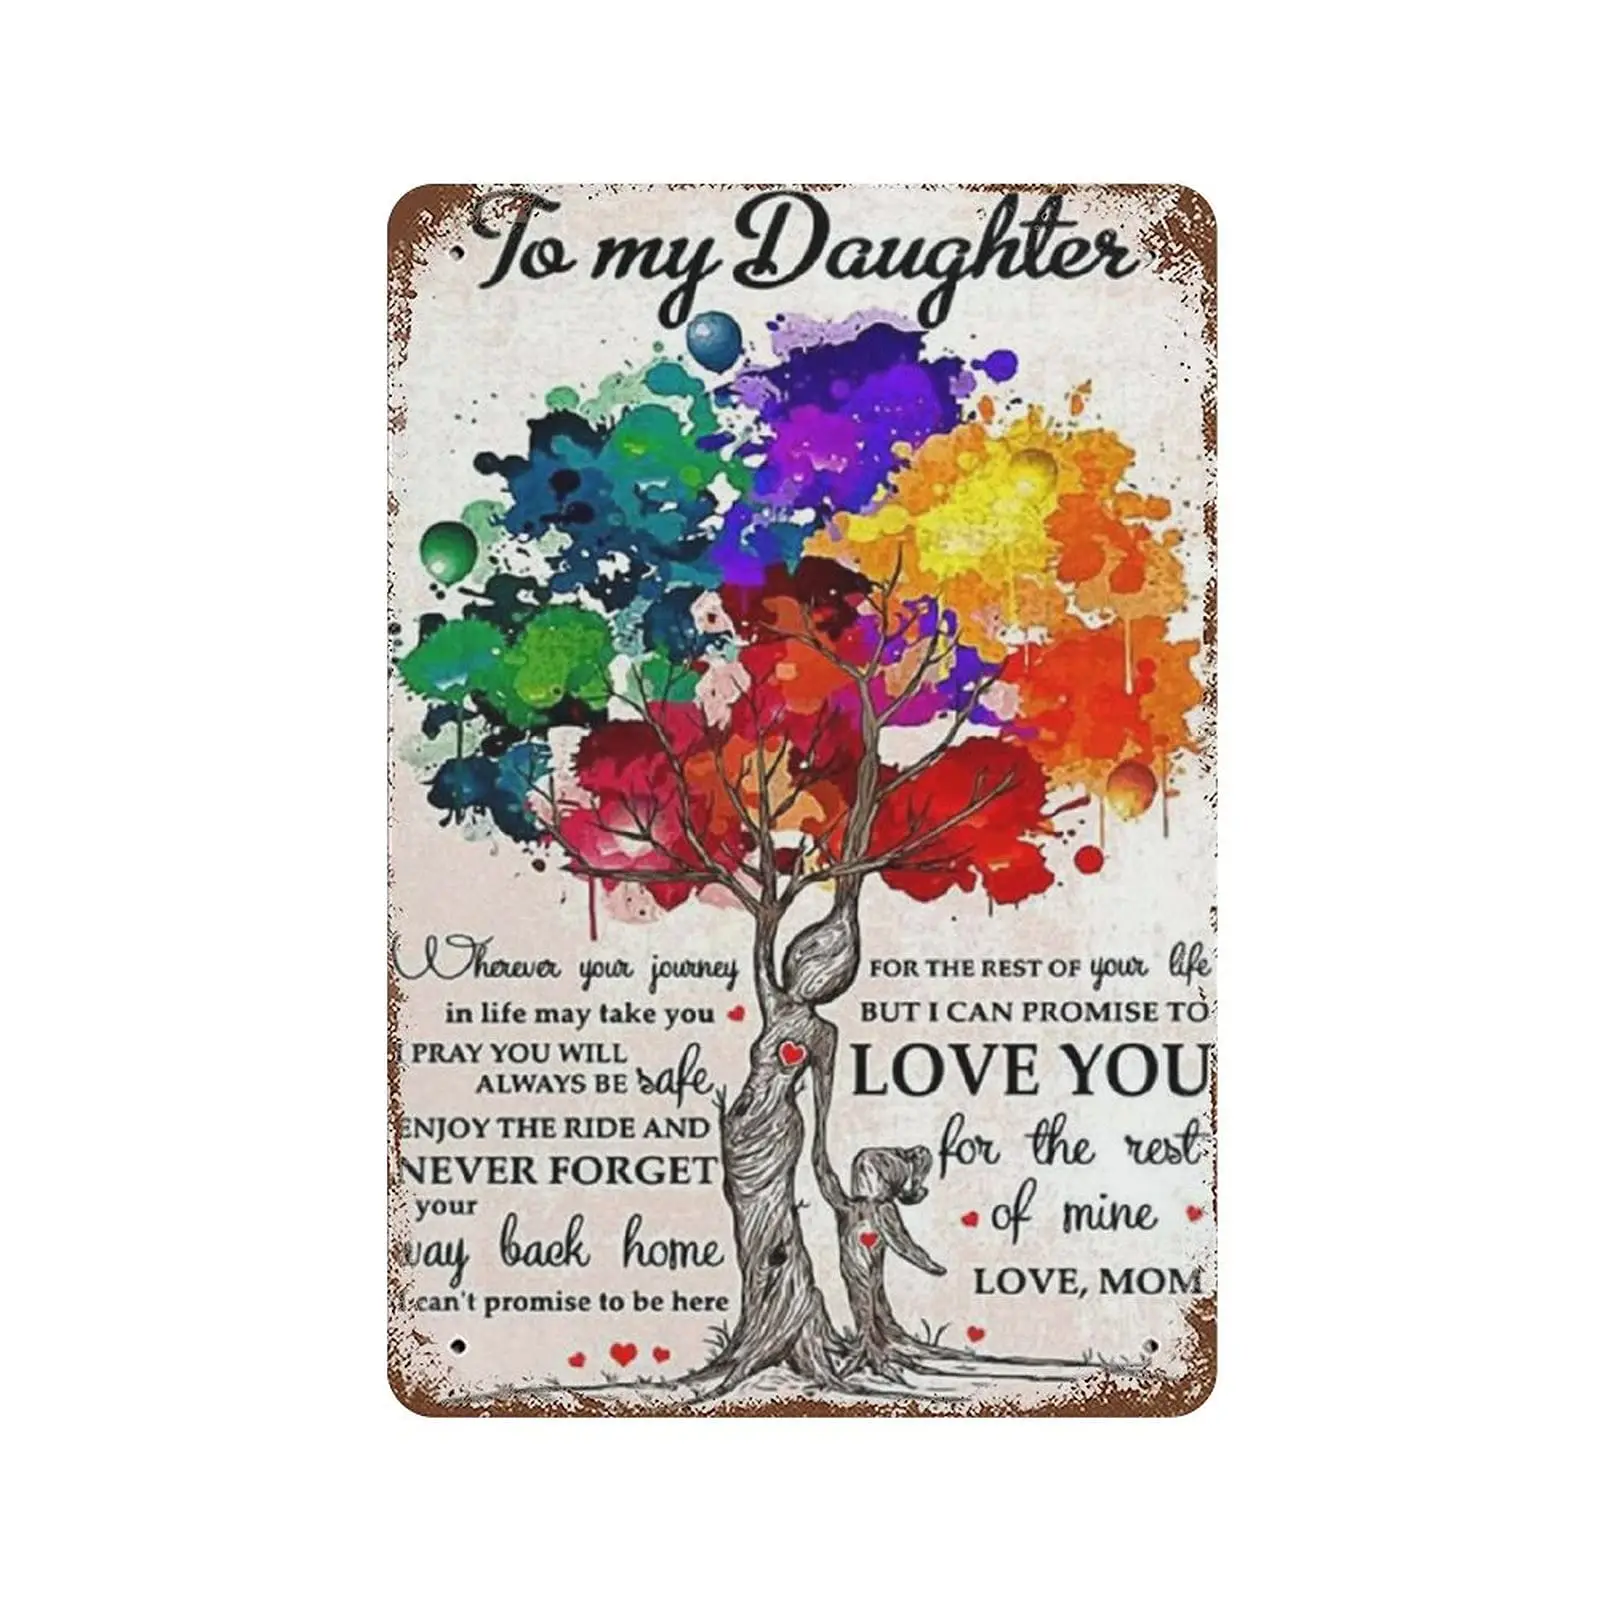 

Vintage Metal Tin Sign Plaque,To My Daughter I Promise to Love You for The Rest of Mine Tin Sign,Man cave Pub Club Cafe Home Dec